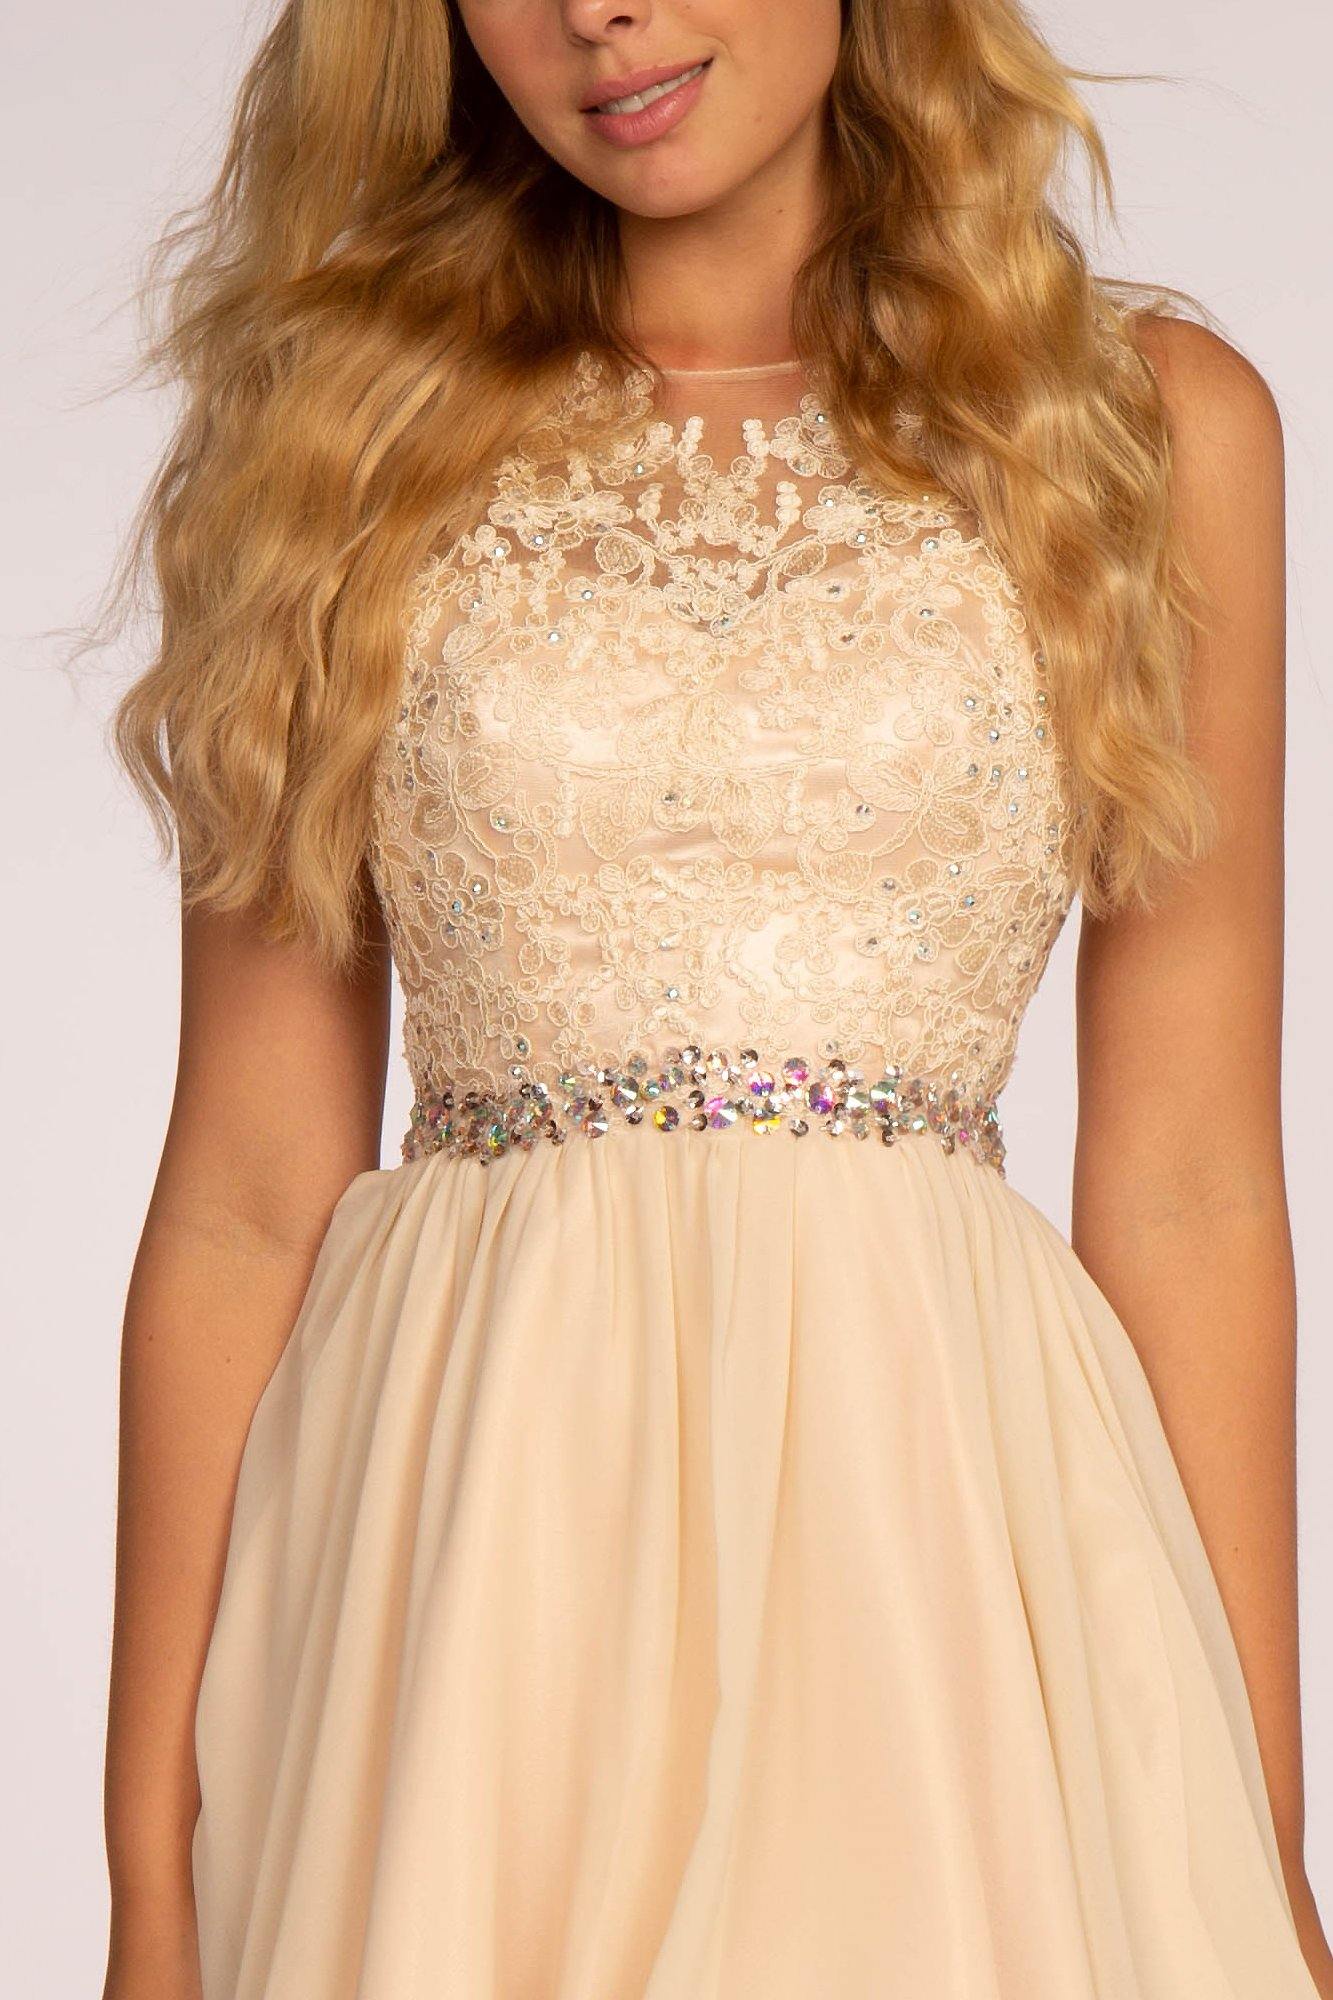 Short Cocktail Homecoming Chiffom Prom Dress - The Dress Outlet Elizabeth K